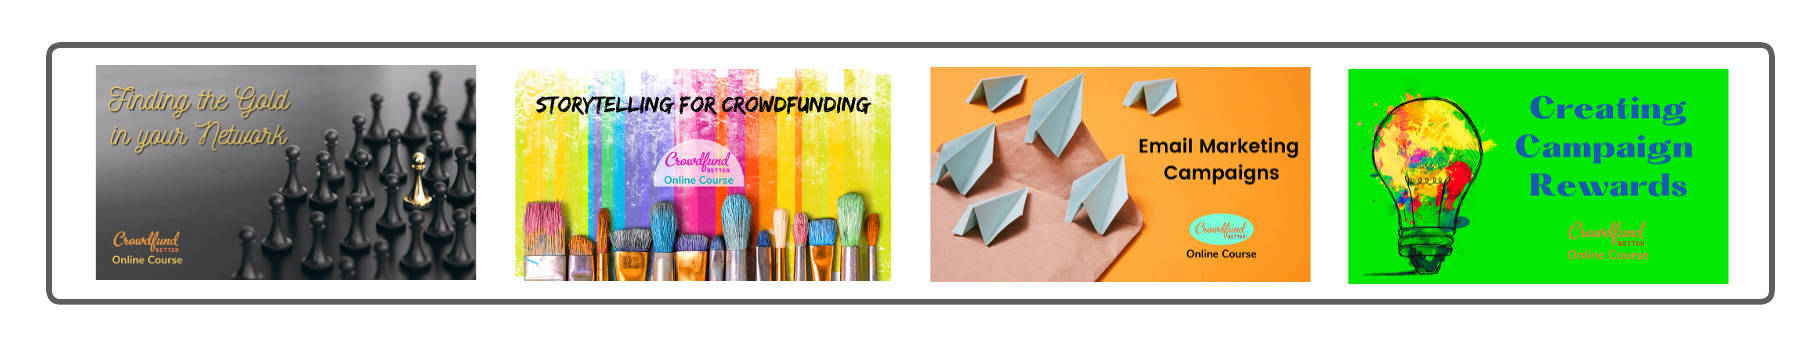 Crowdfund Better, Crowdfund Better Process™, Step 3 Training, crowdfunding online courses, crowdfunding courses, finding the gold in your network online course, storytelling for crowdfunding online course, email marketing for crowdfunding online course, creating campaign rewards online course